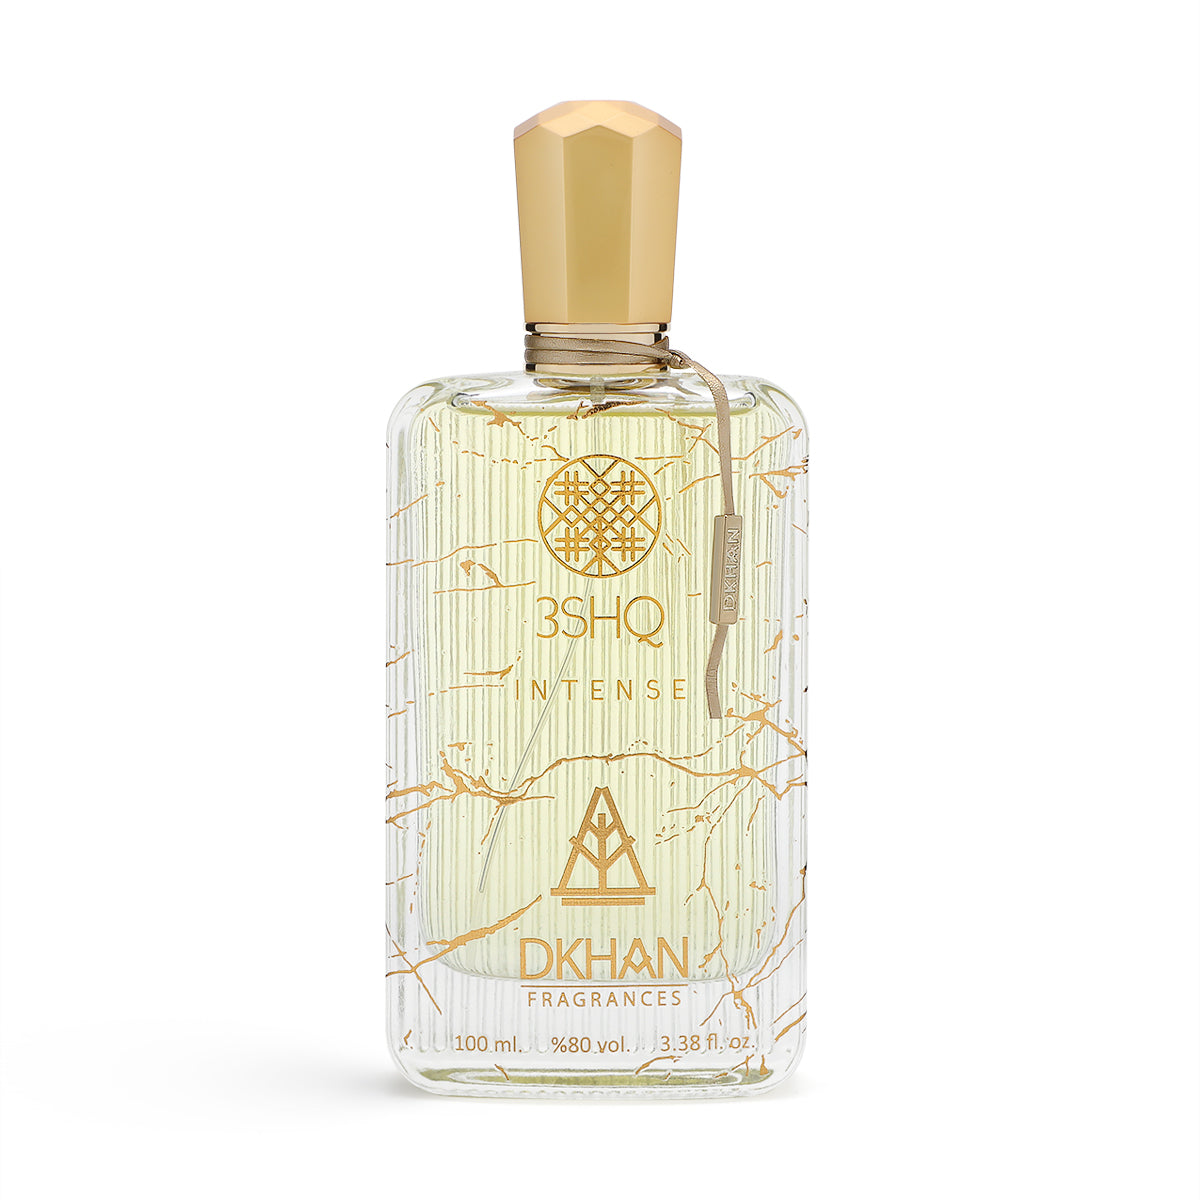 The image displays an elegant, clear glass perfume bottle adorned with artistic golden lines and splashes against a soft, off-white backdrop. The bottle is labeled "3SHQ INTENSE" in a refined font, with the "DKHAN FRAGRANCES" emblem prominently featured beneath it. A gold-colored cap sits atop the bottle, complementing the golden accents. The fragrance liquid has a light, amber tint, suggesting a sense of warmth and richness.